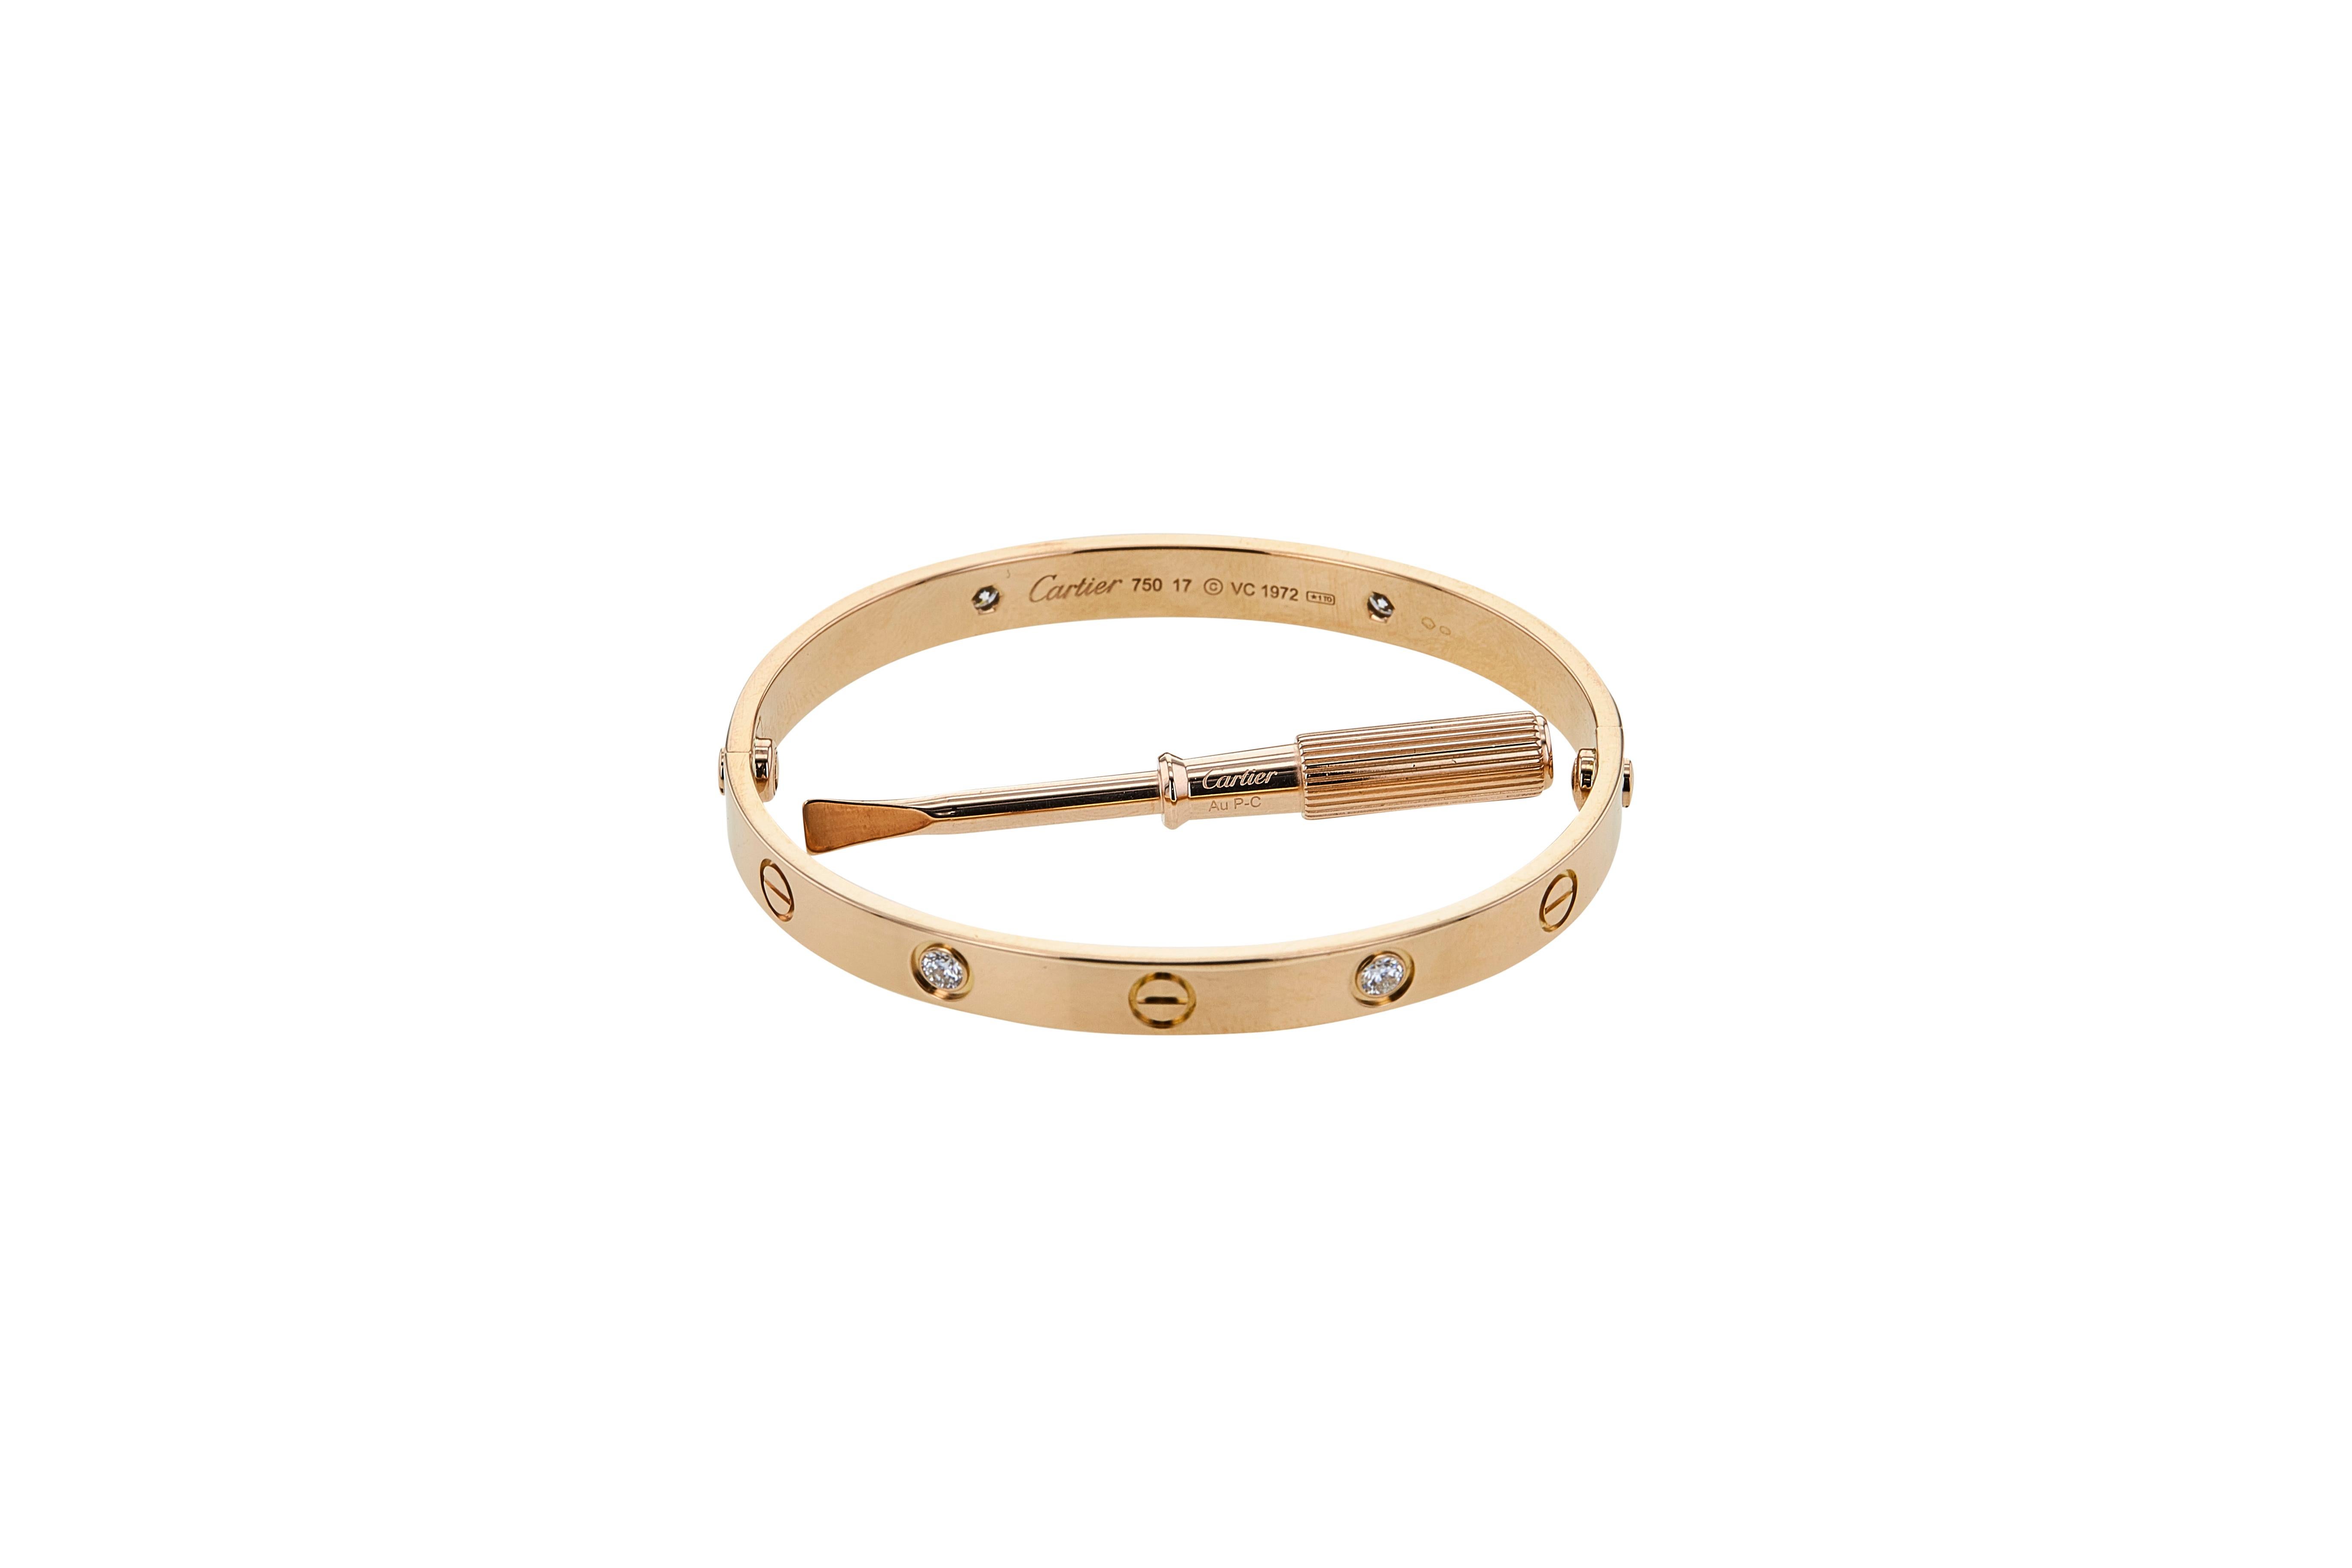 Cartier 'Love' Rose Gold 4-Diamond Bracelet In Good Condition For Sale In New York, NY